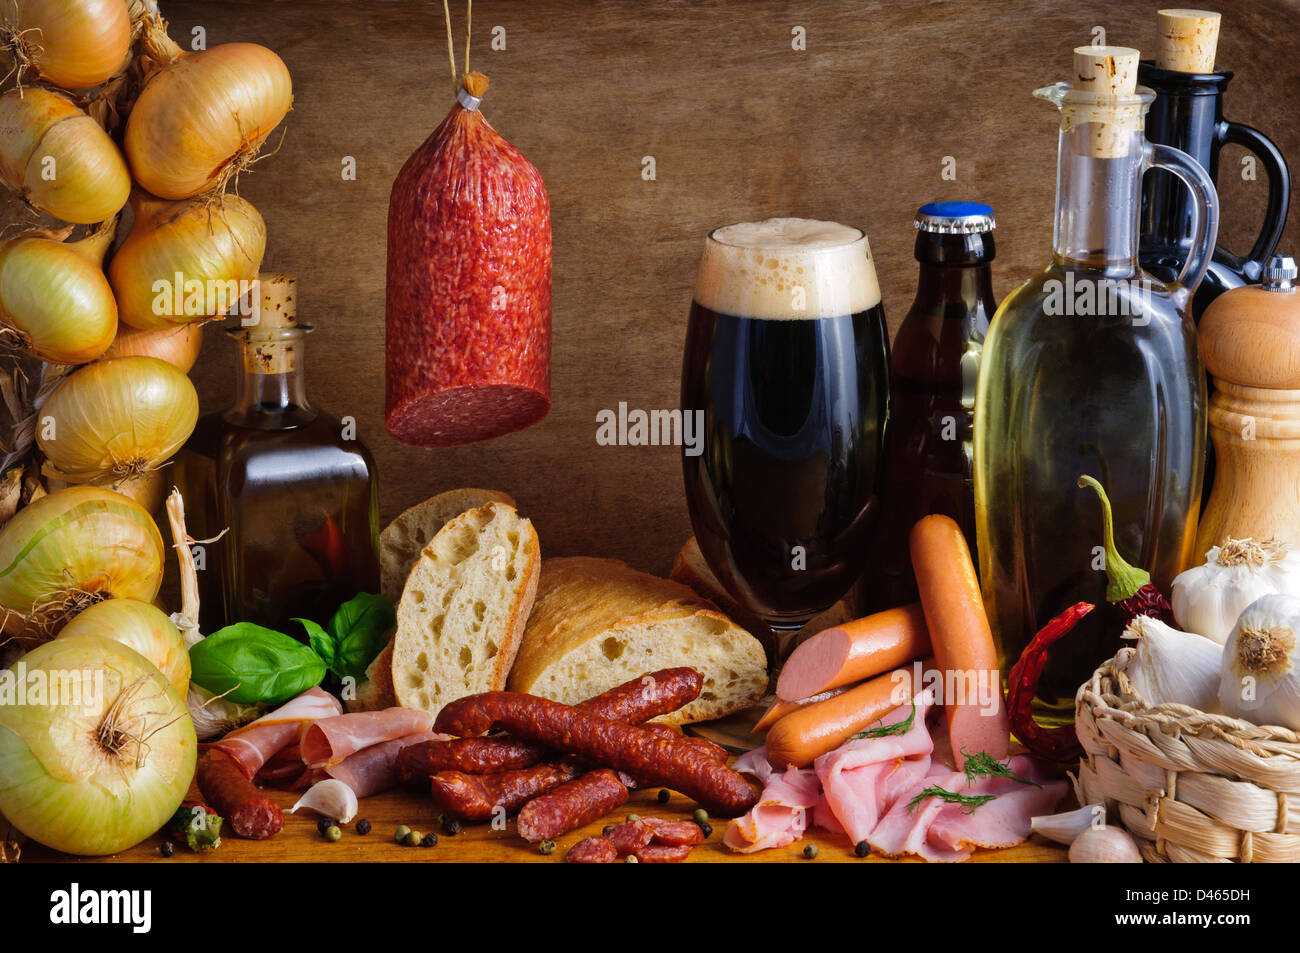 Still life with sausages, beer and traditional food ingredients Stock Photo